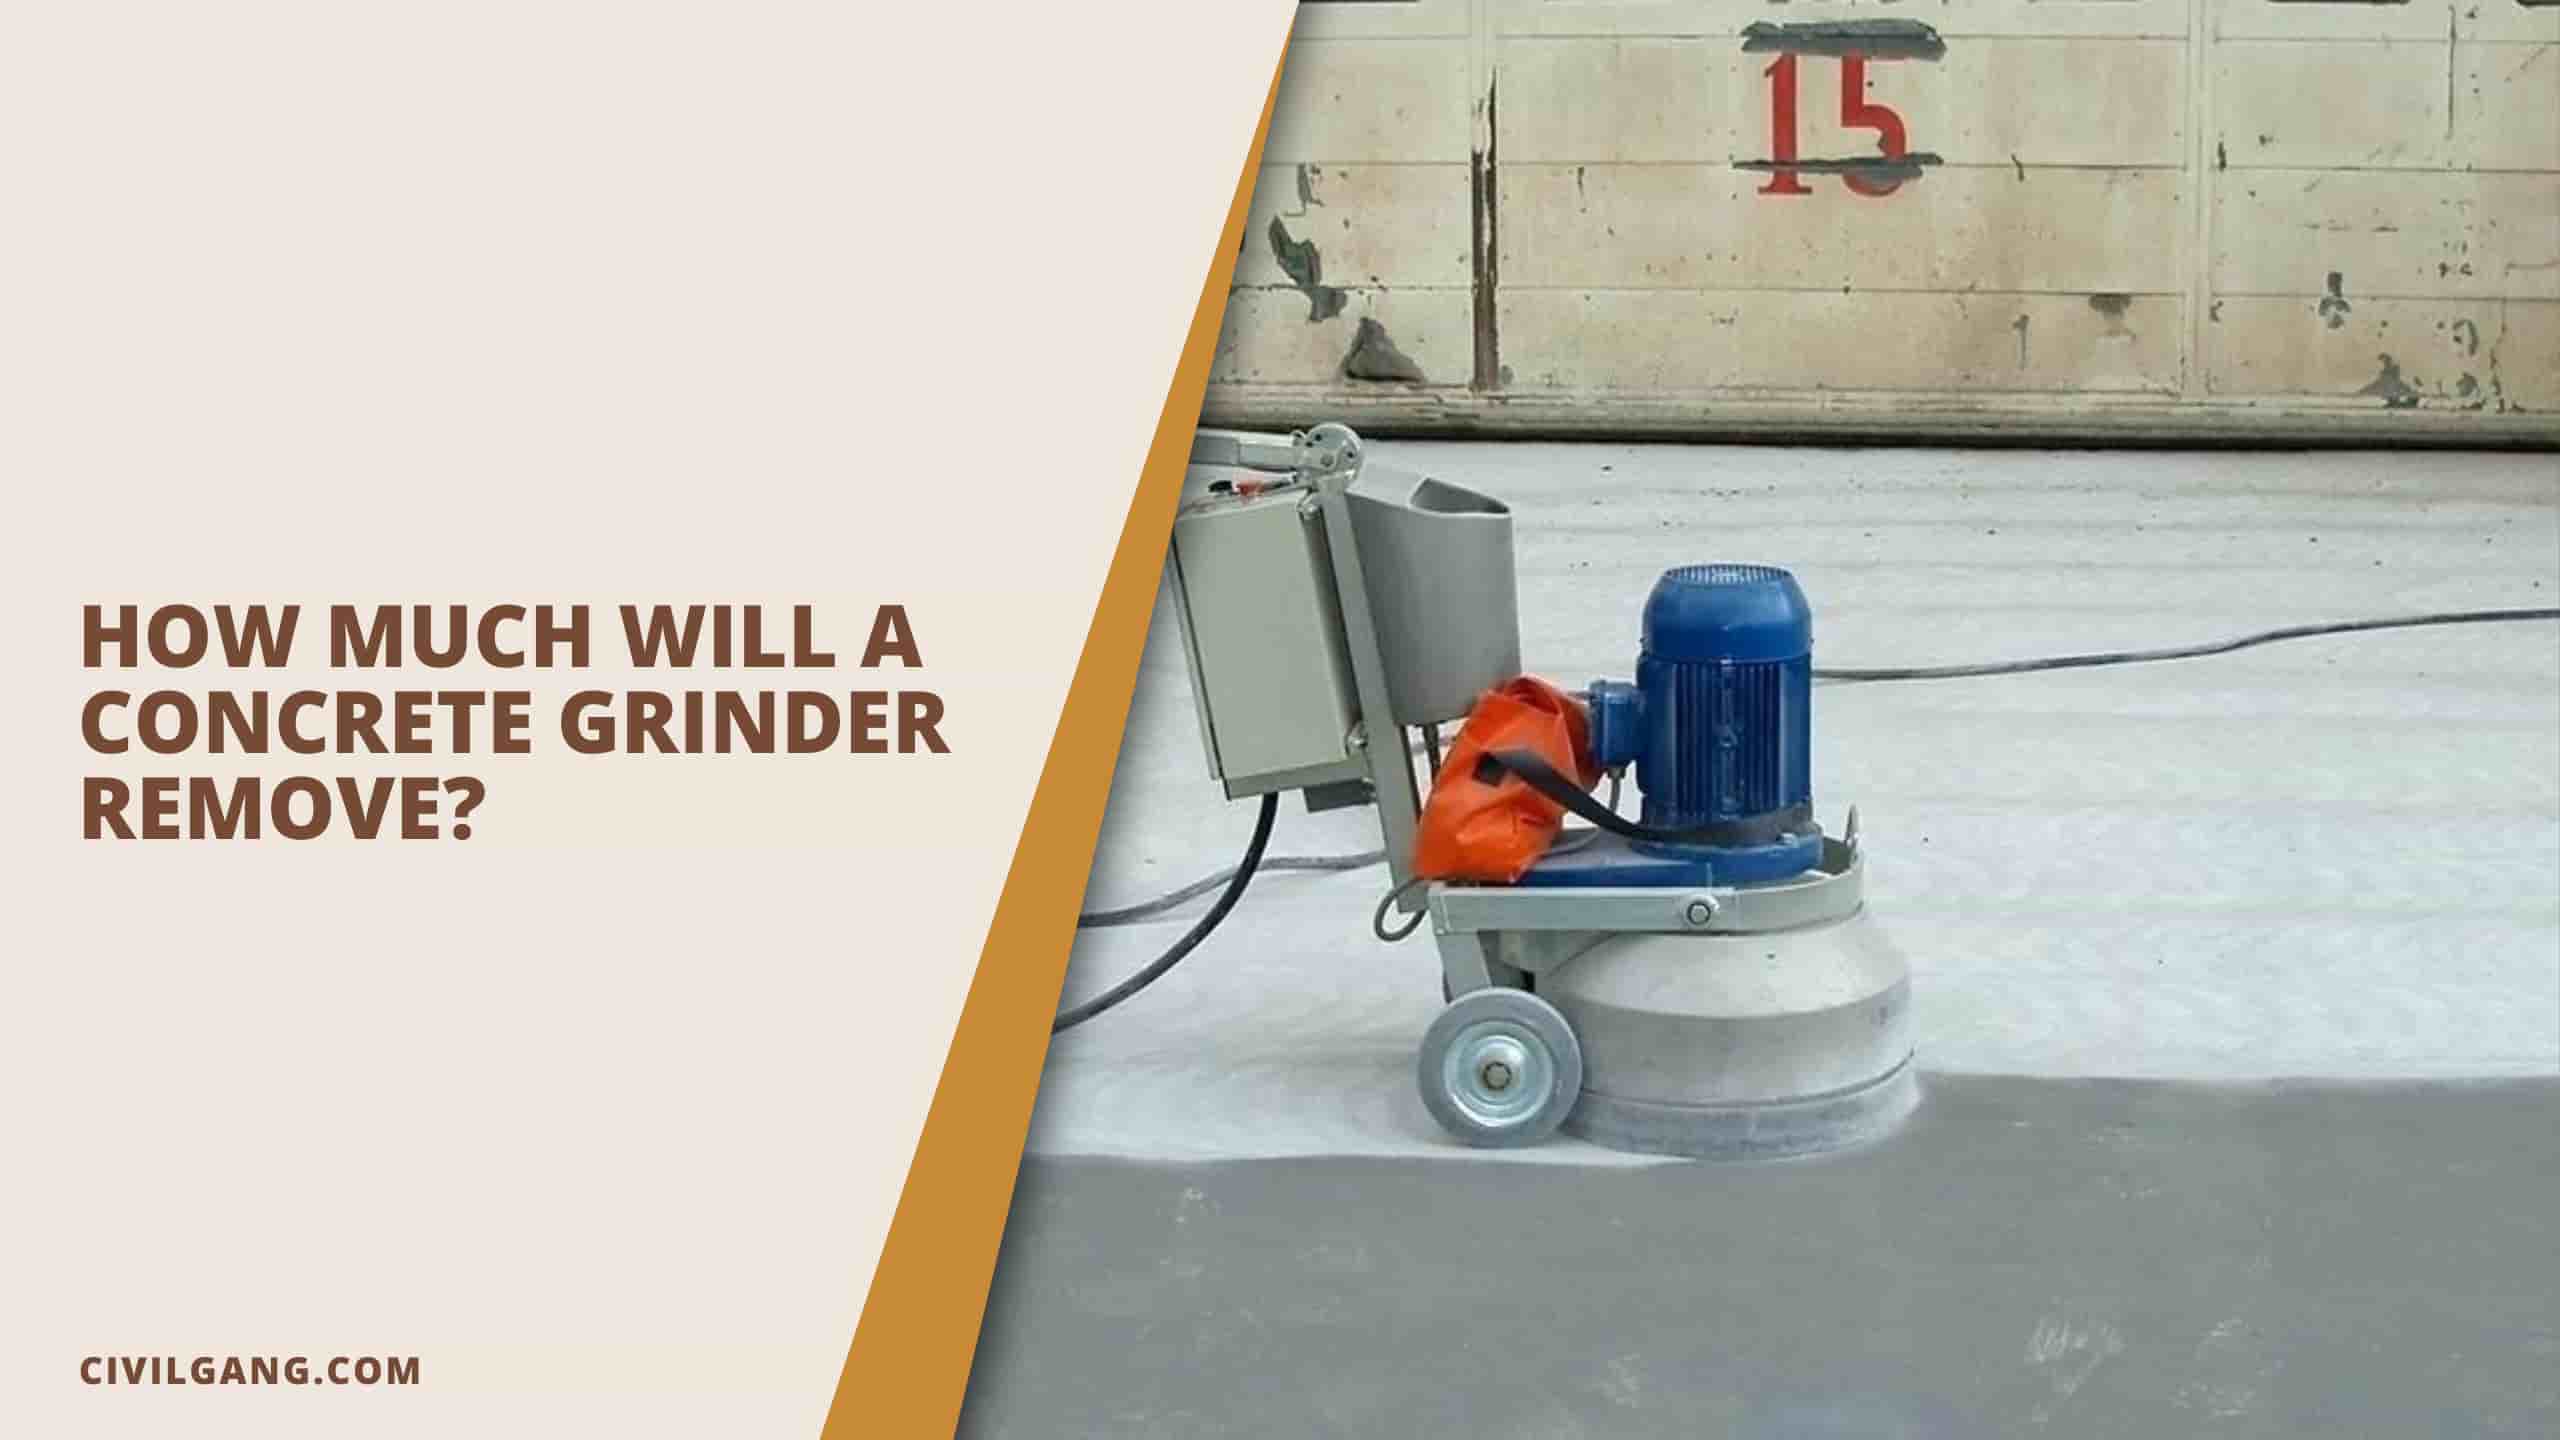 How Much Will a Concrete Grinder Remove?